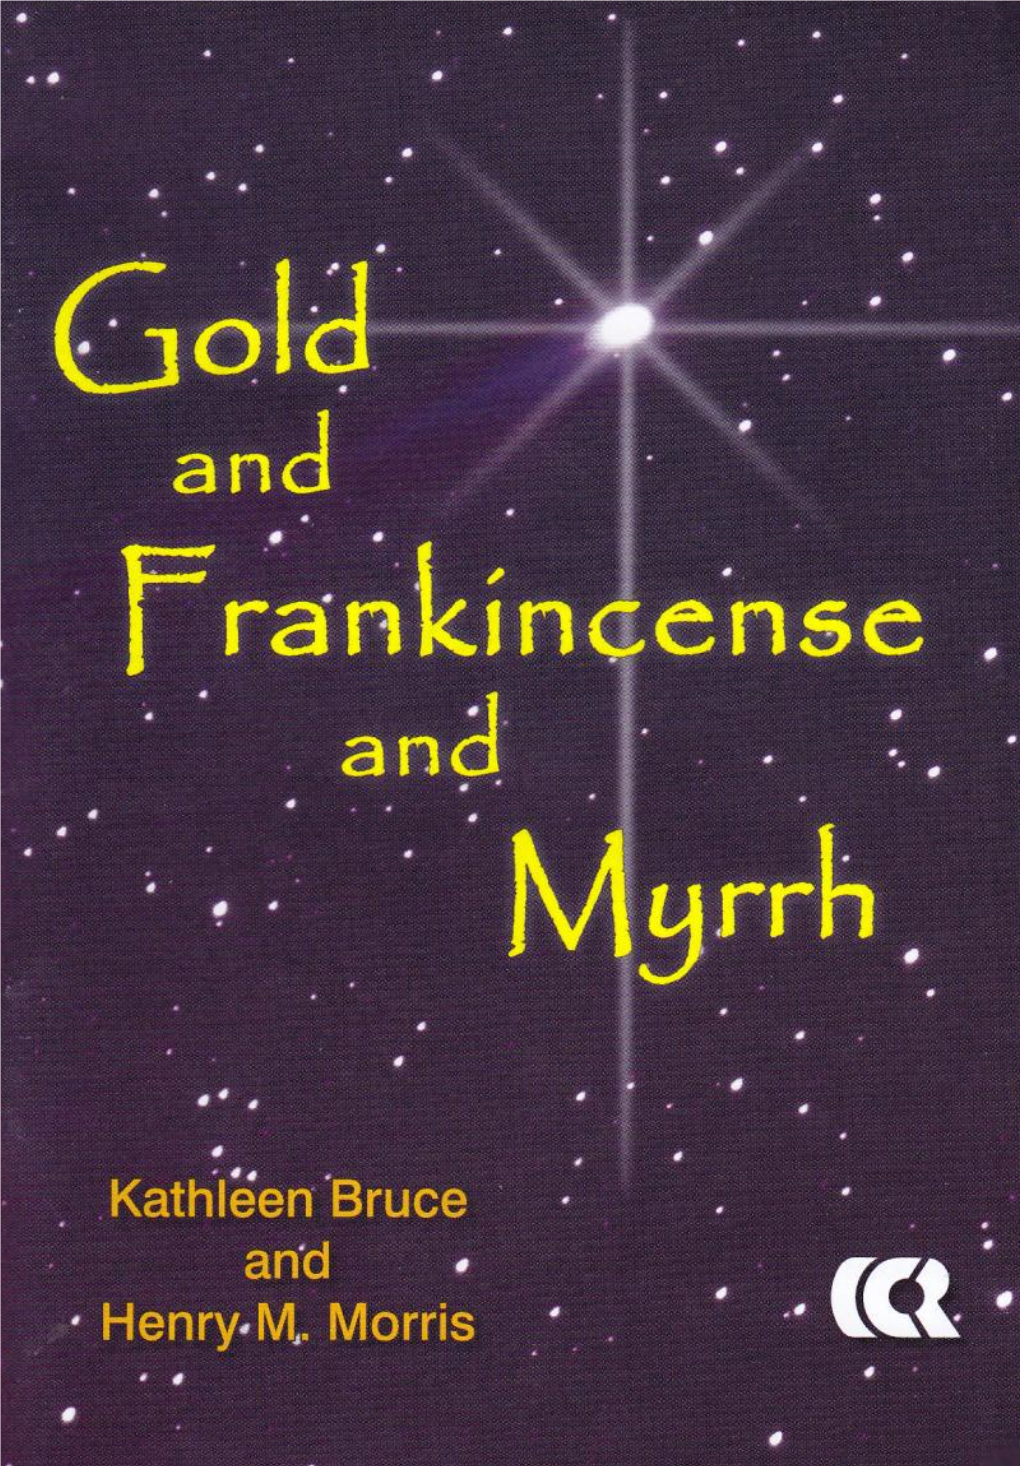 Gold and Frankincense and Myrrh